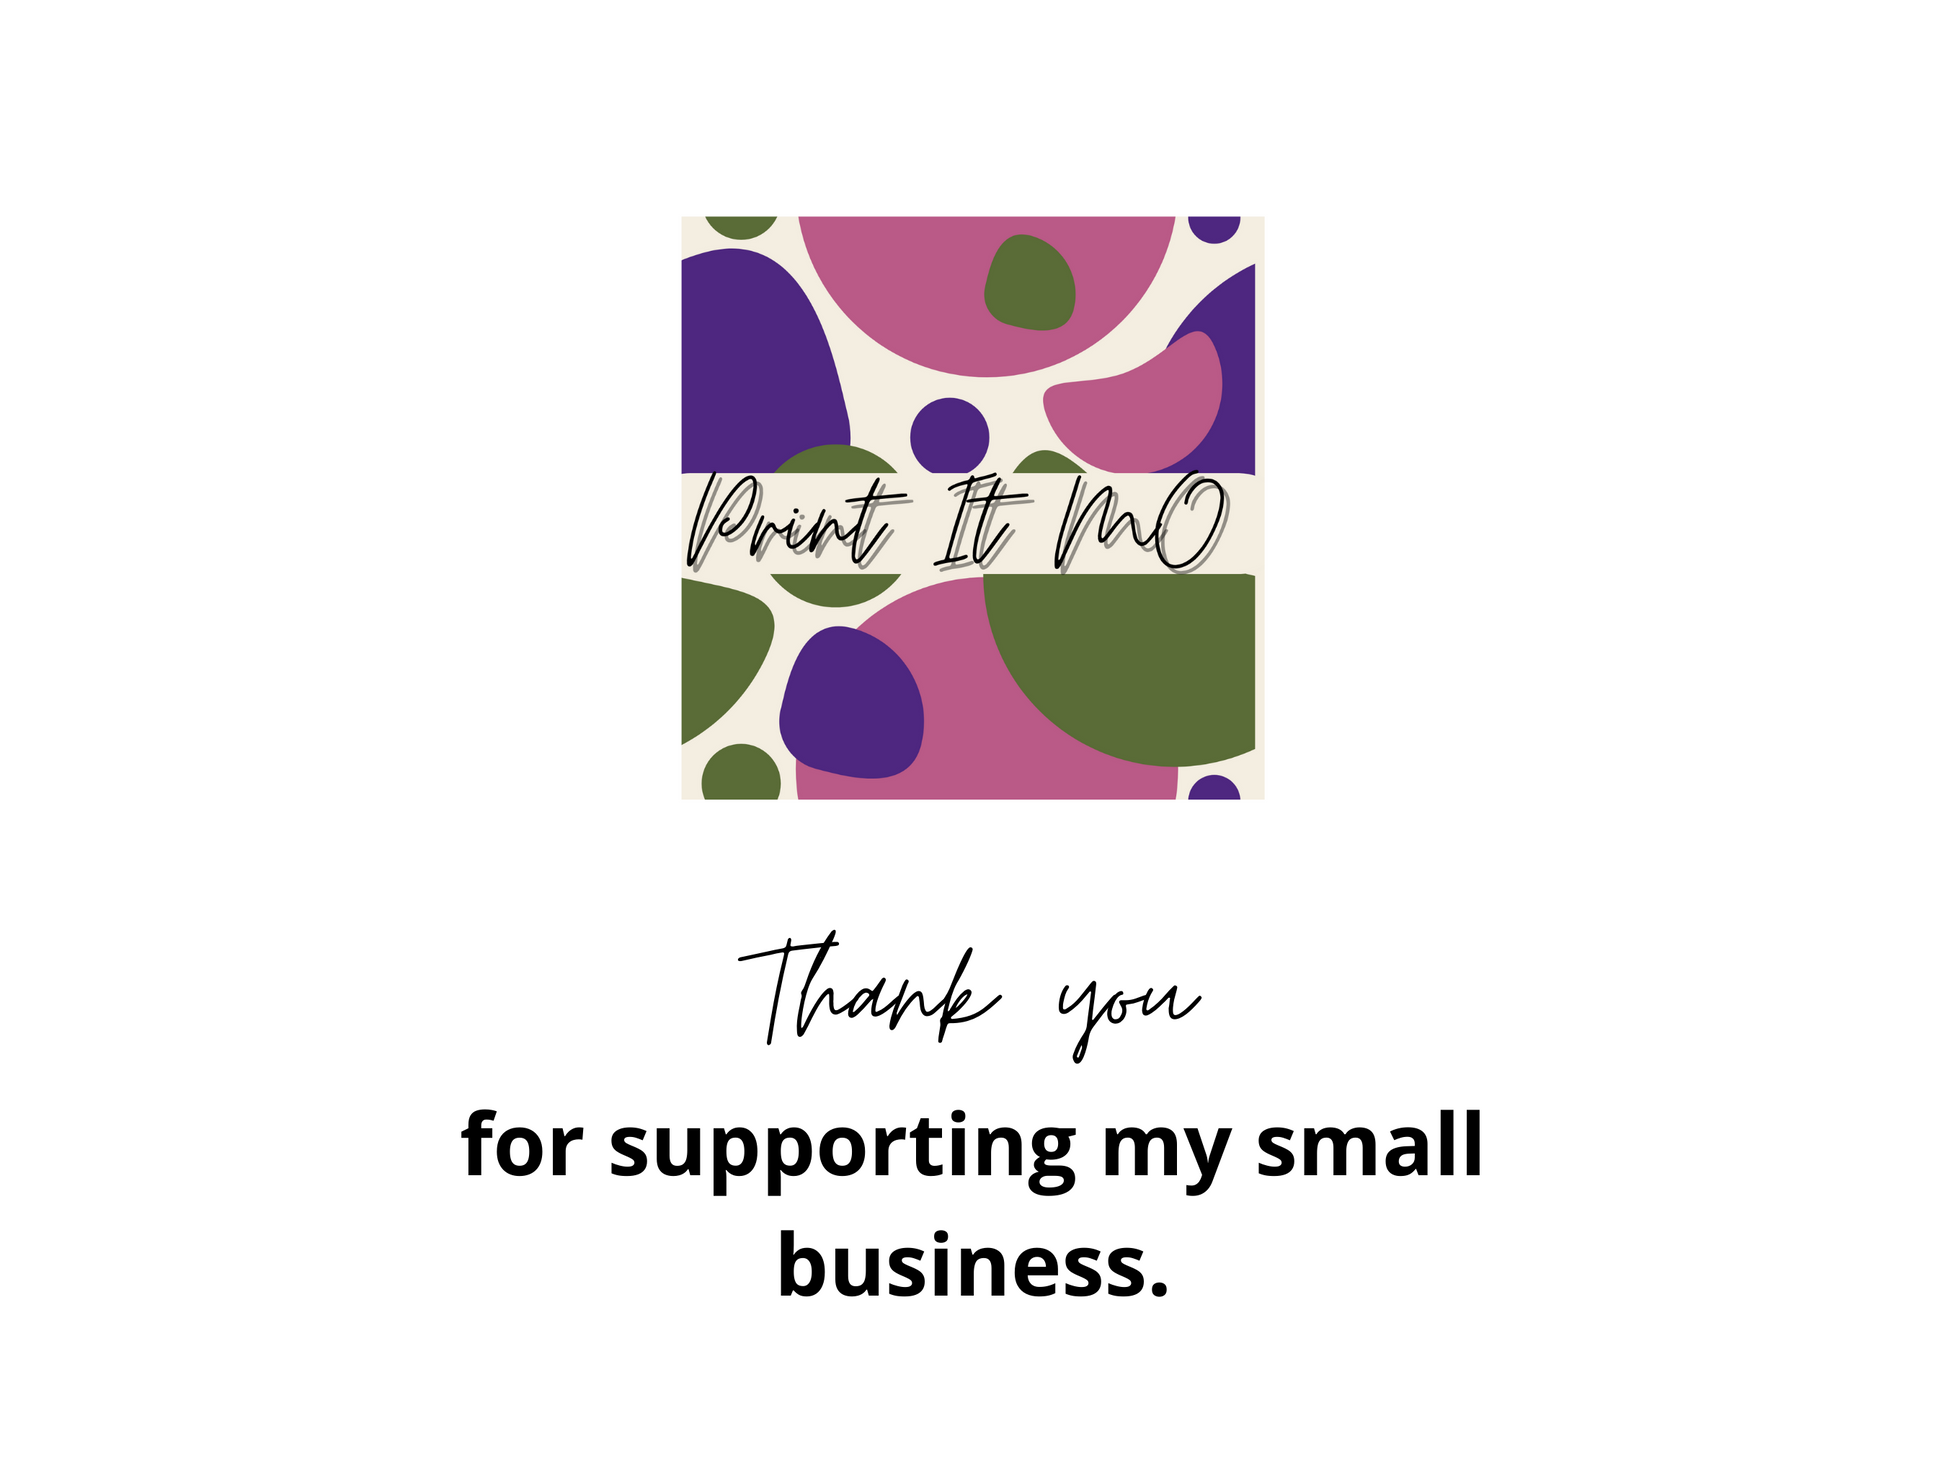 Print It Mo logo with a thank you message.